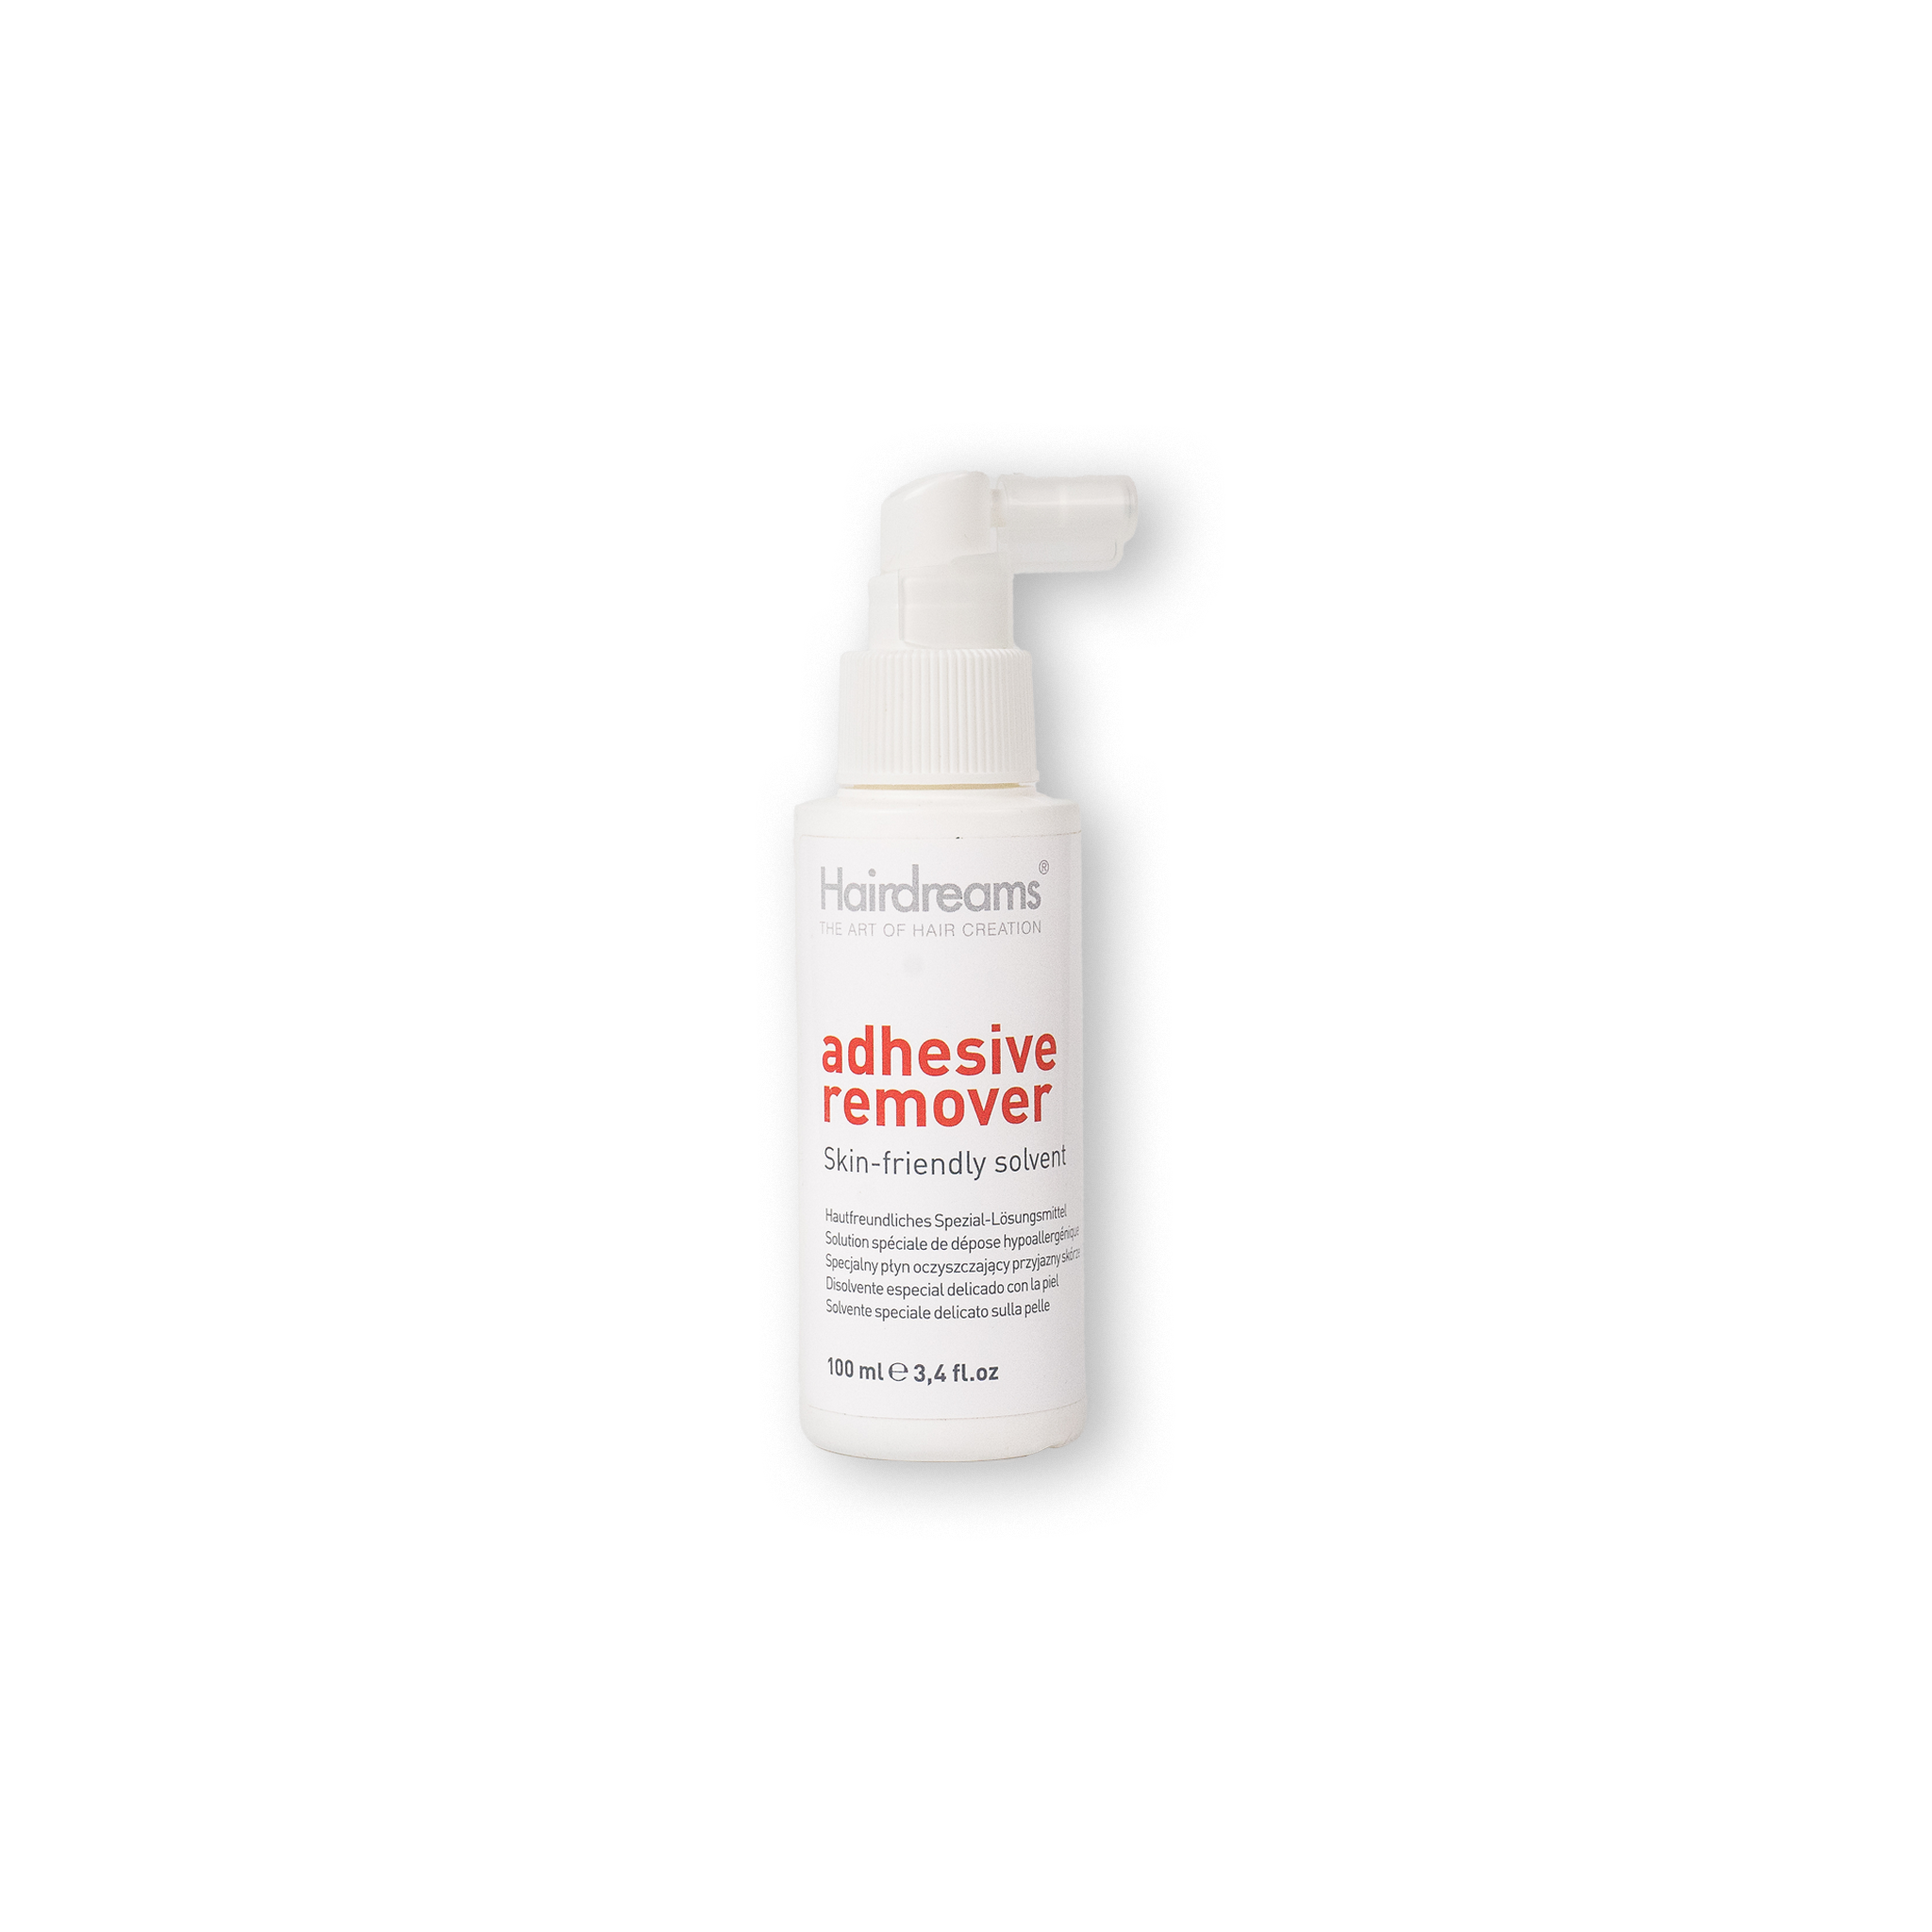 Microlines Adhesive Remover for removing adhesive residues - 100 ml –  Hairdreams Haarhandels GmbH